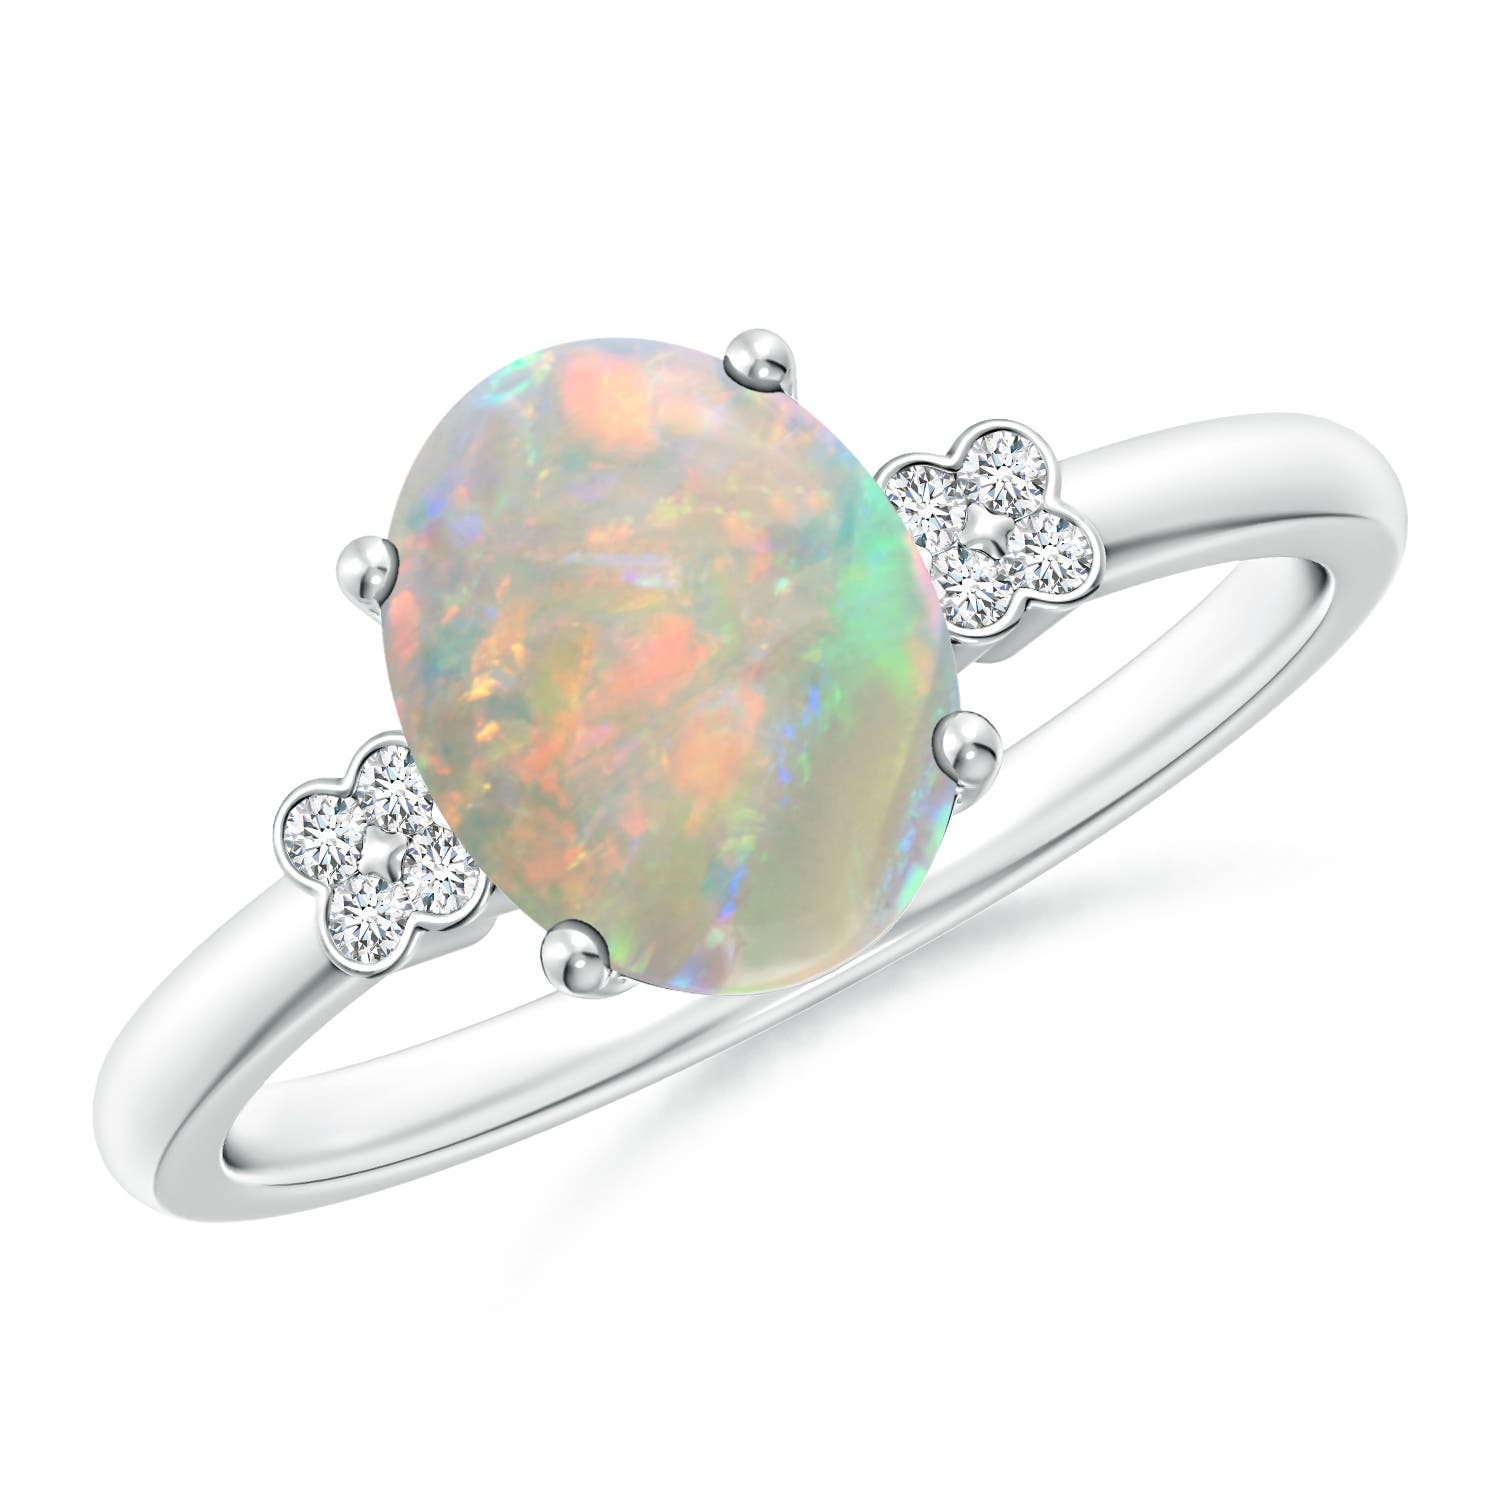 Solitaire Oval Opal Ring with Diamond Floral Accent | Angara